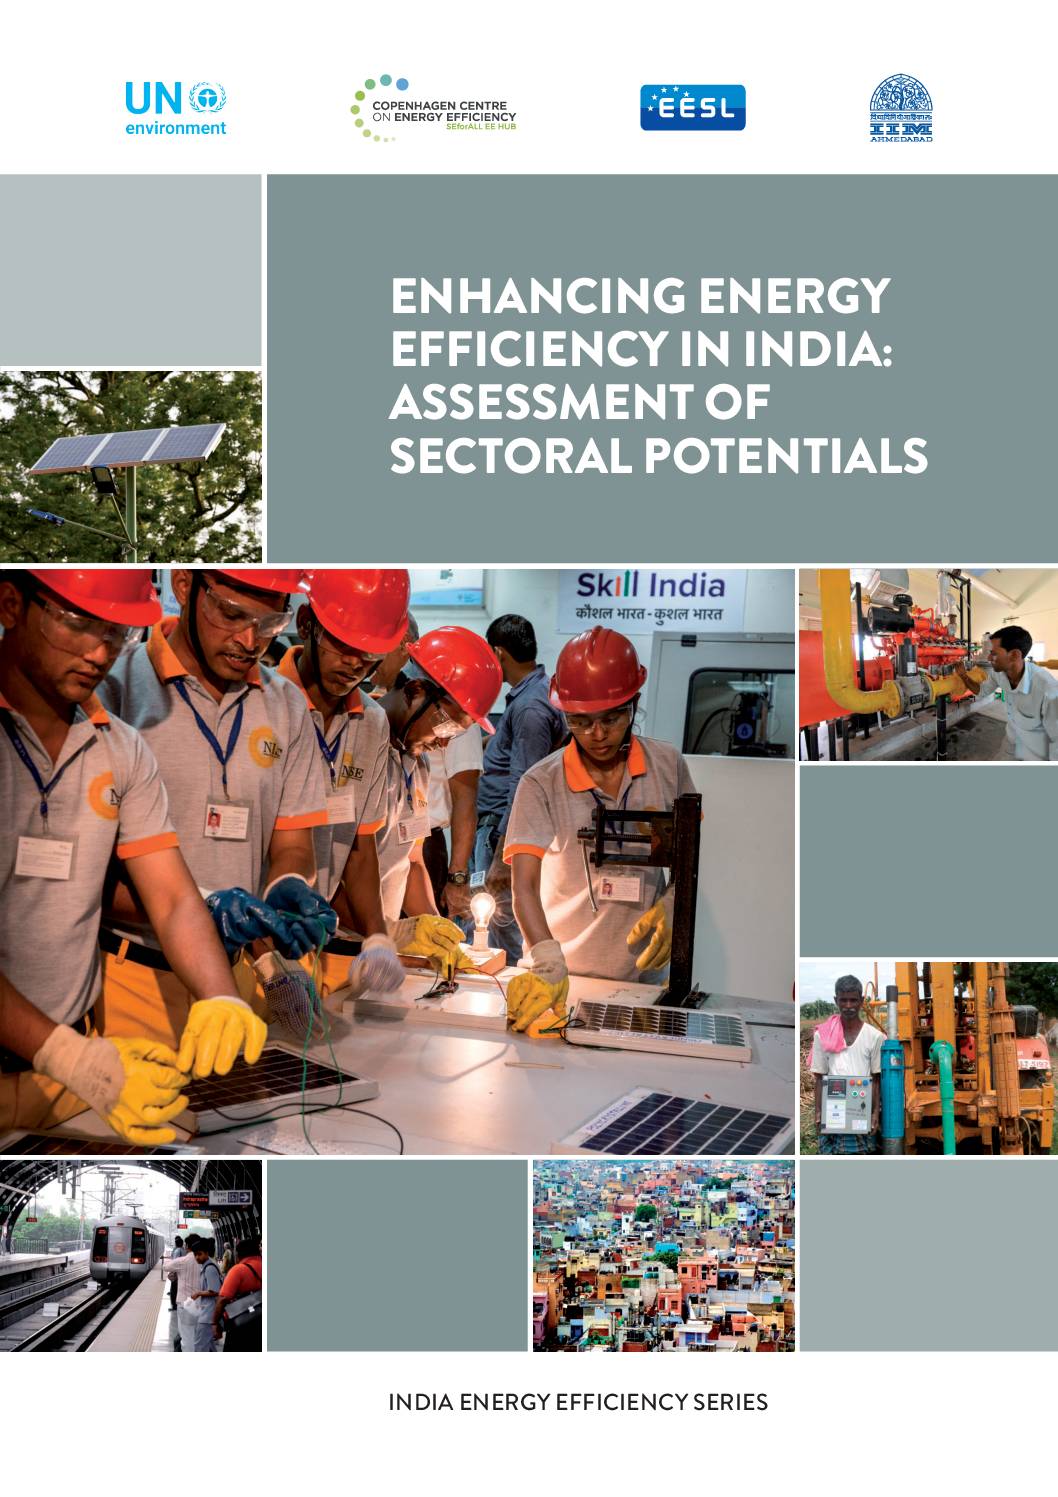 Enhancing Energy Efficiency in India: Assessment of Sectoral Potentials